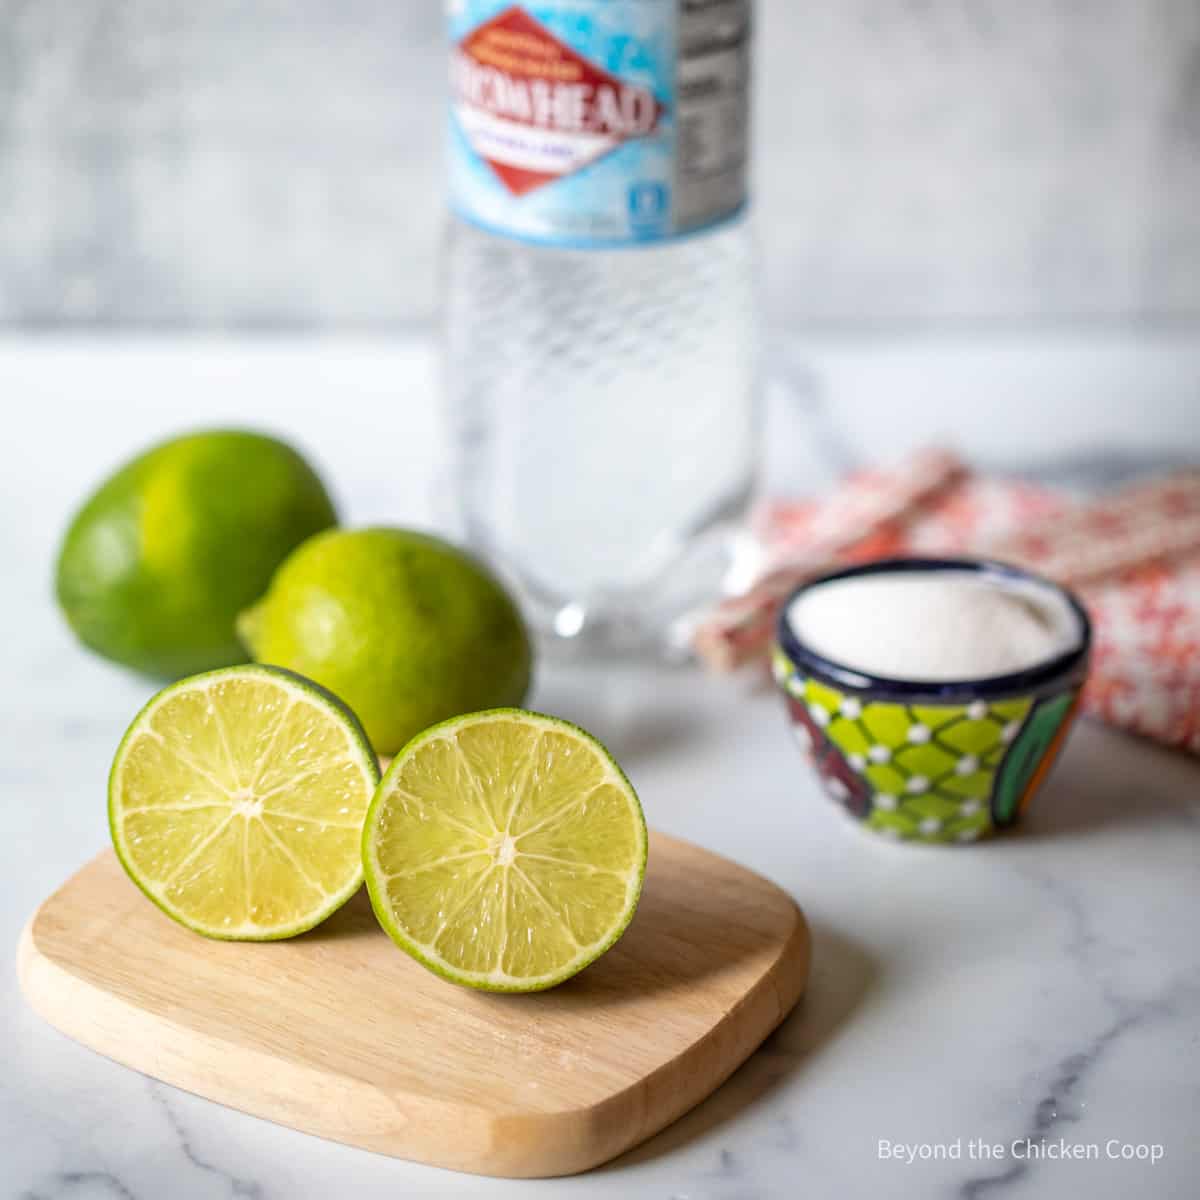 Fresh limes, sugar and a bottle of sparkling water.